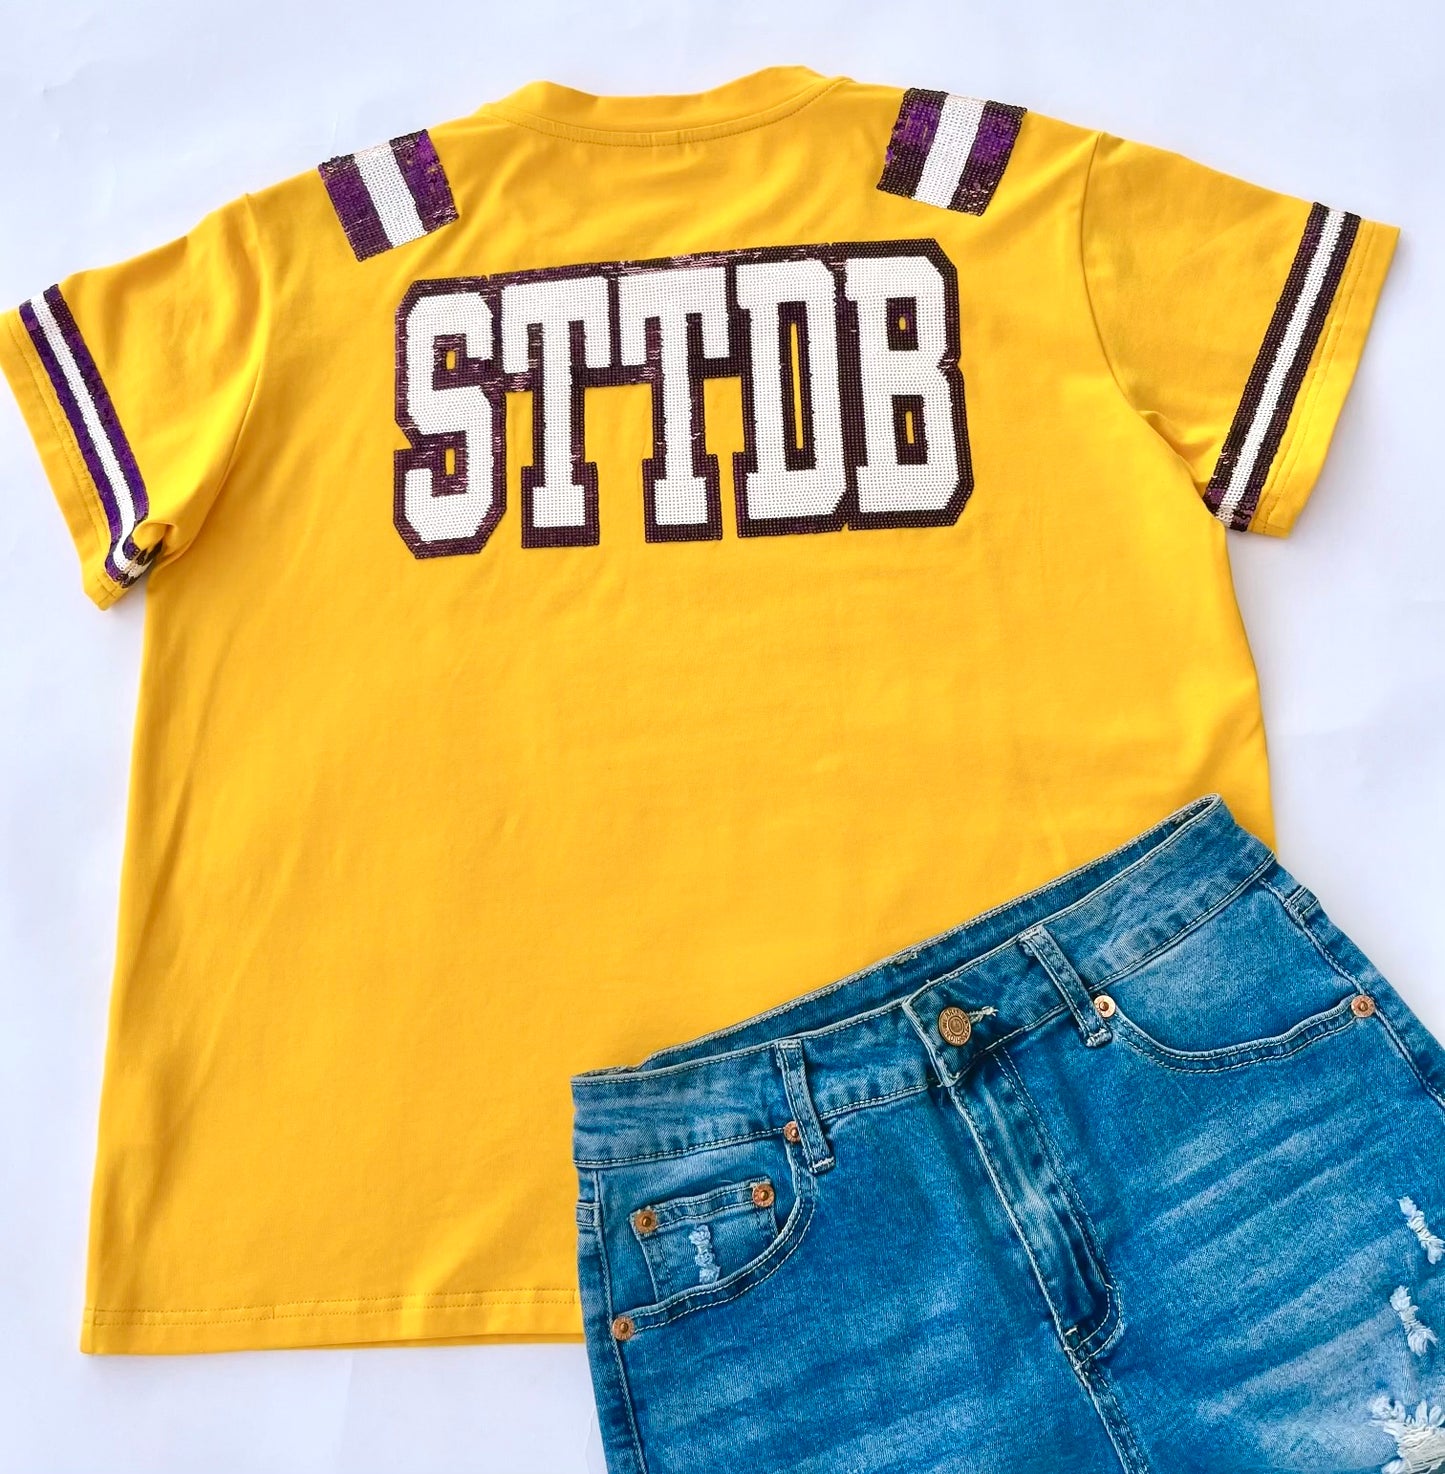 STTDB Let the Band Play Neck | Women's Sequin Jersey Tee (Yellow)